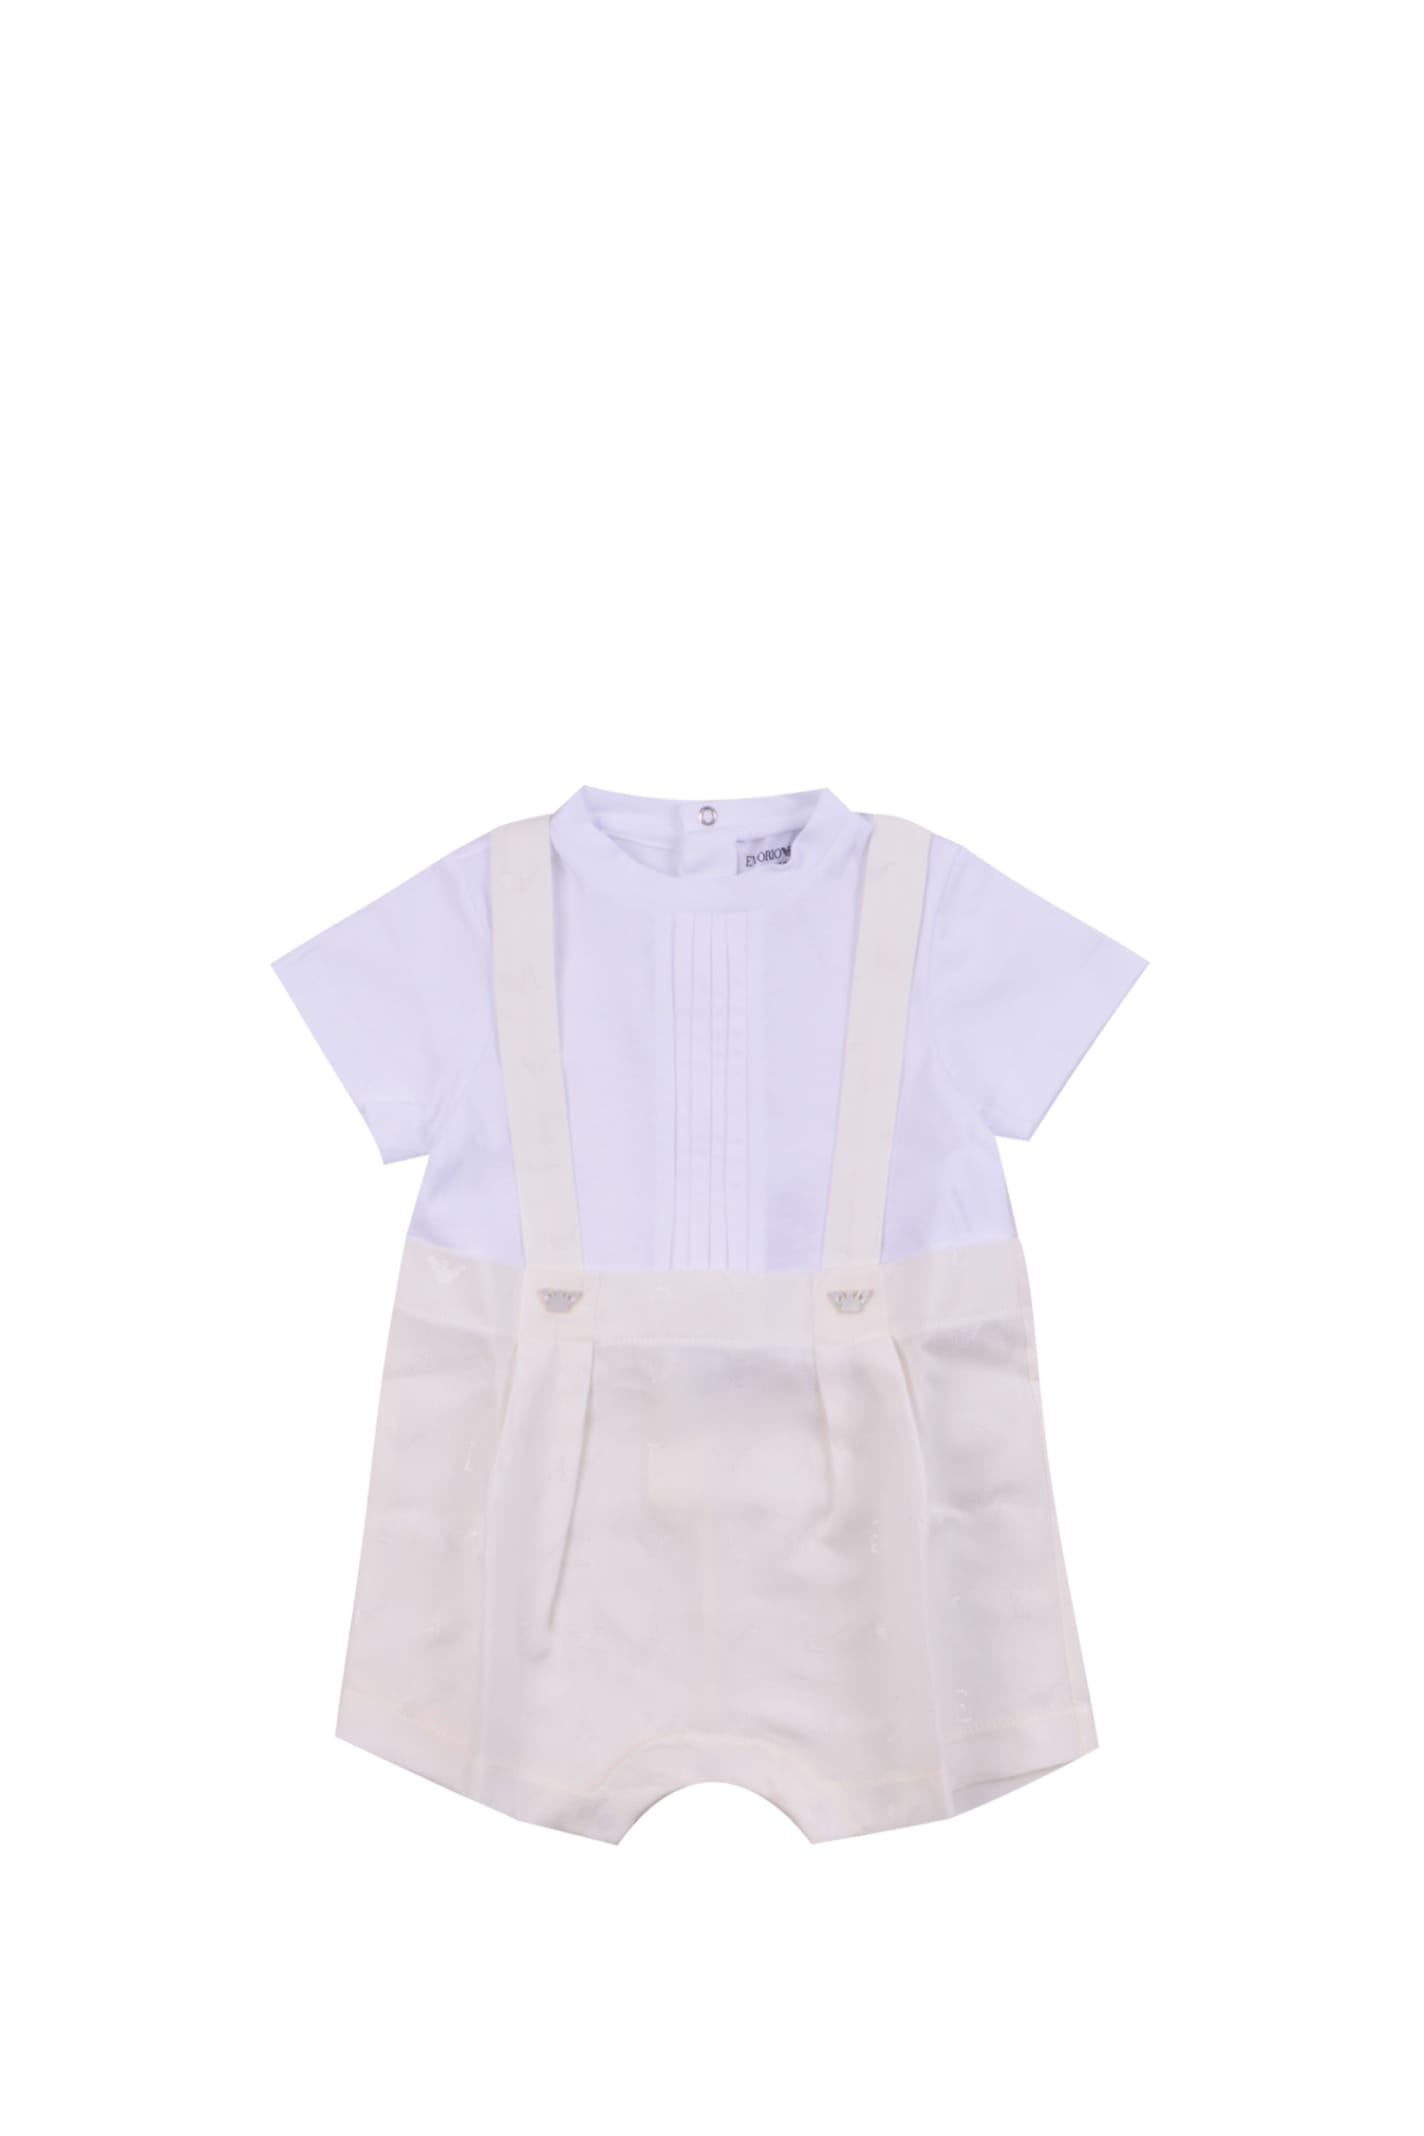 Emporio Armani Babies' Whole Playsuit In White